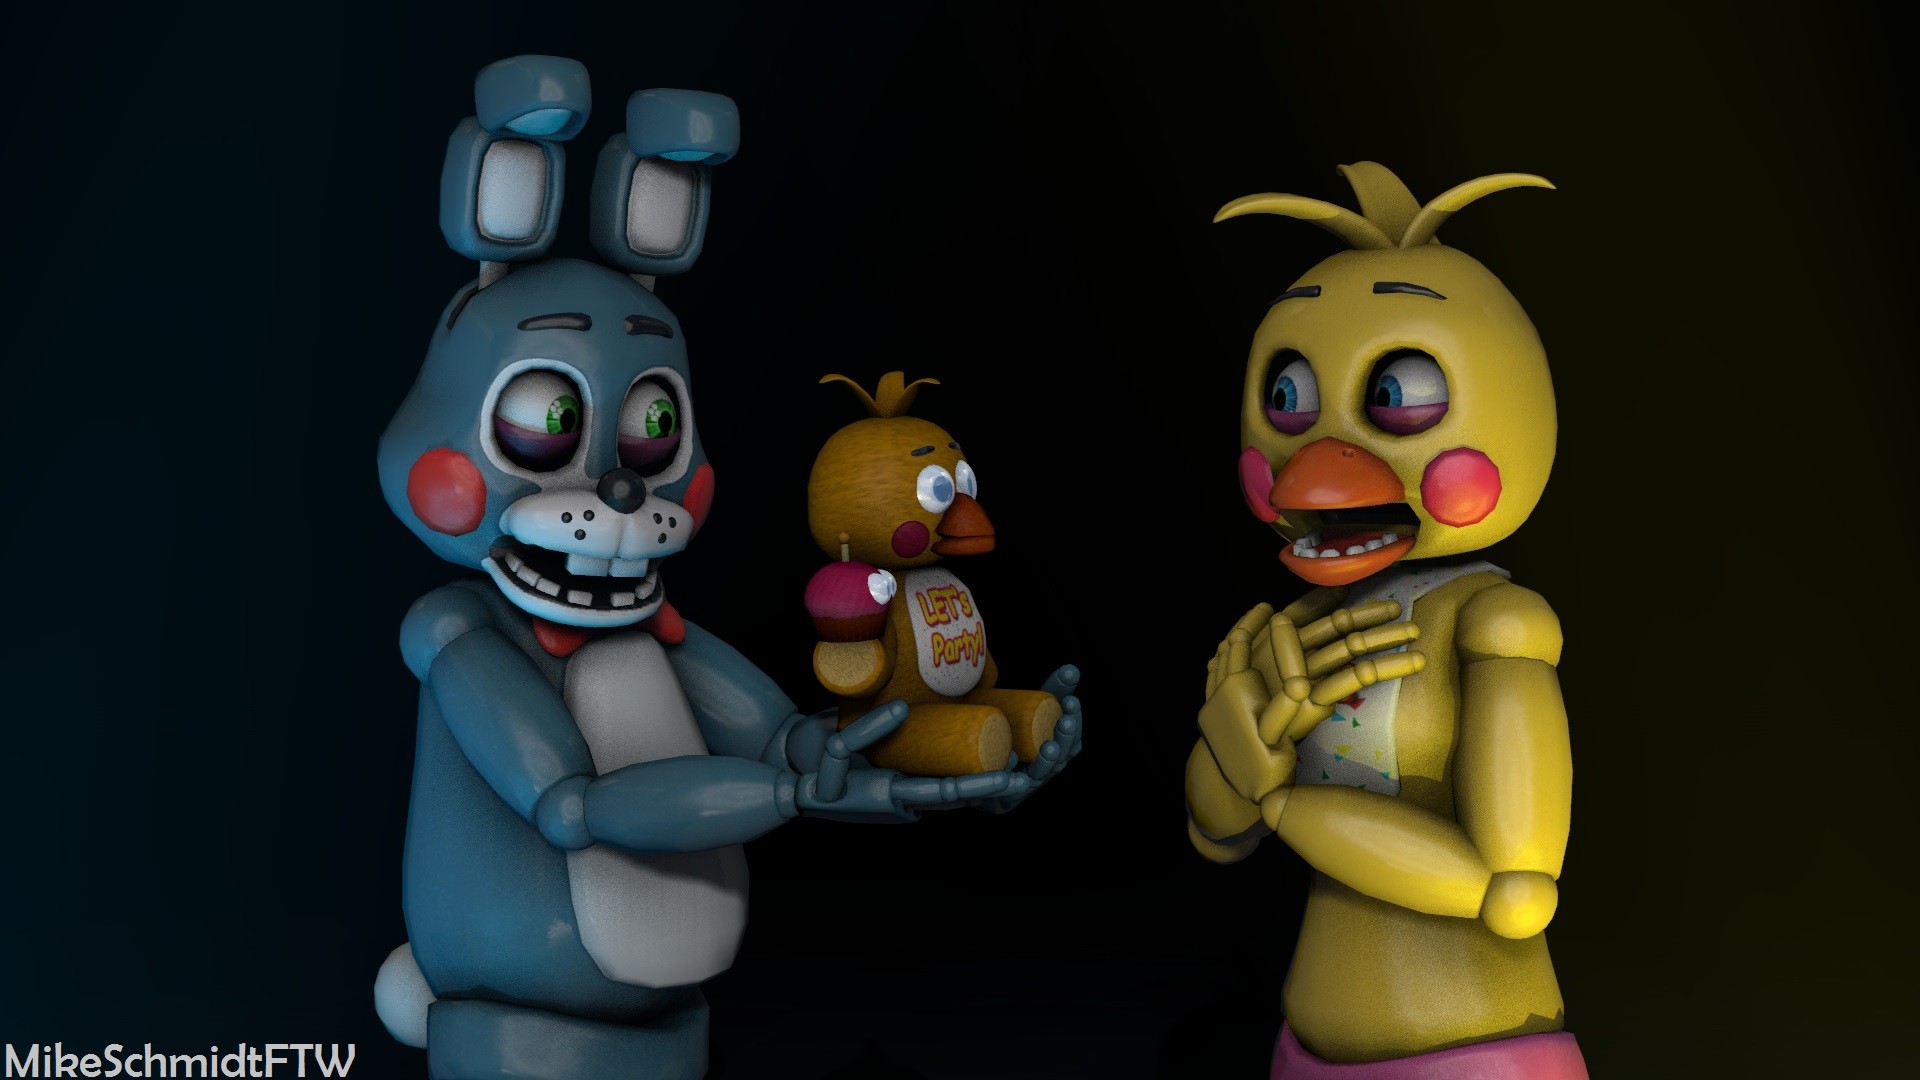 1920x1080 Toy Bonnie and Toy Chica by OfficerSchmidtFTW on DeviantArt